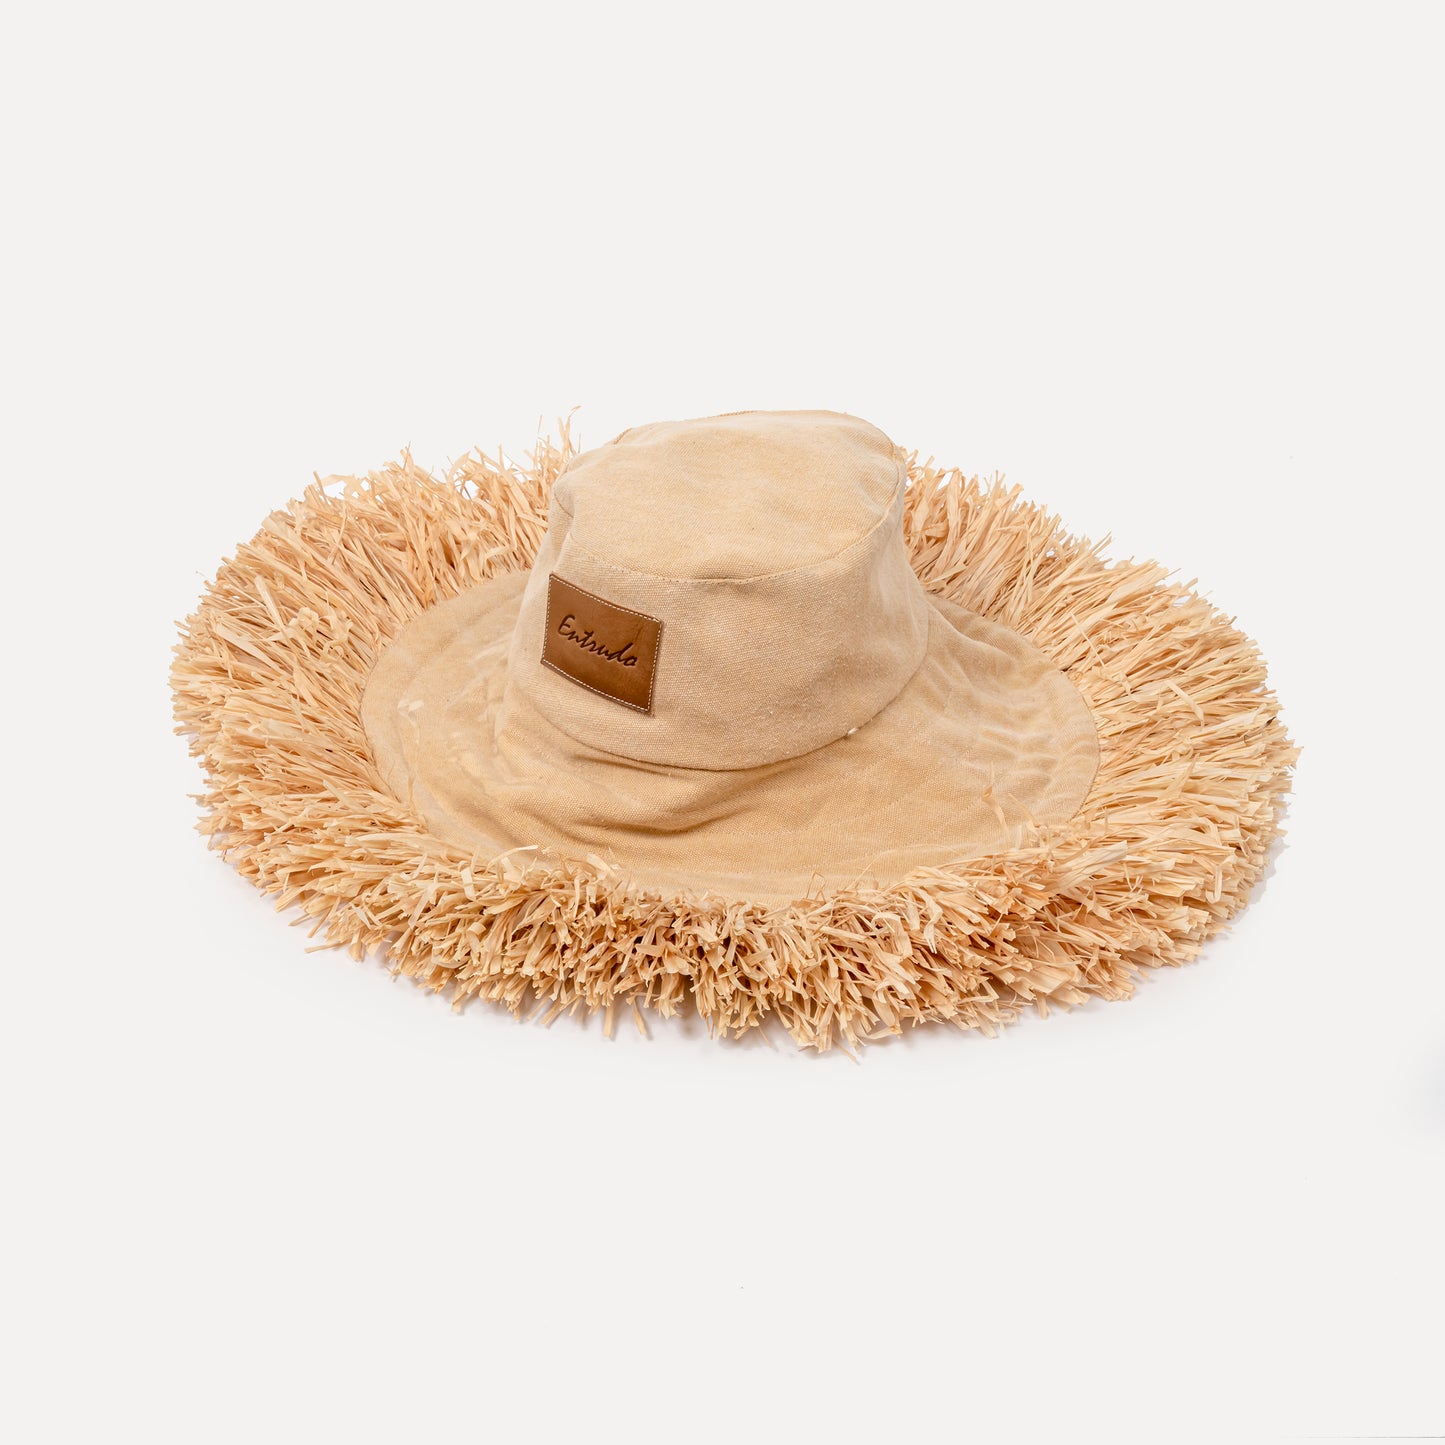 Lalim - hat in recycled canvas and natural raffia